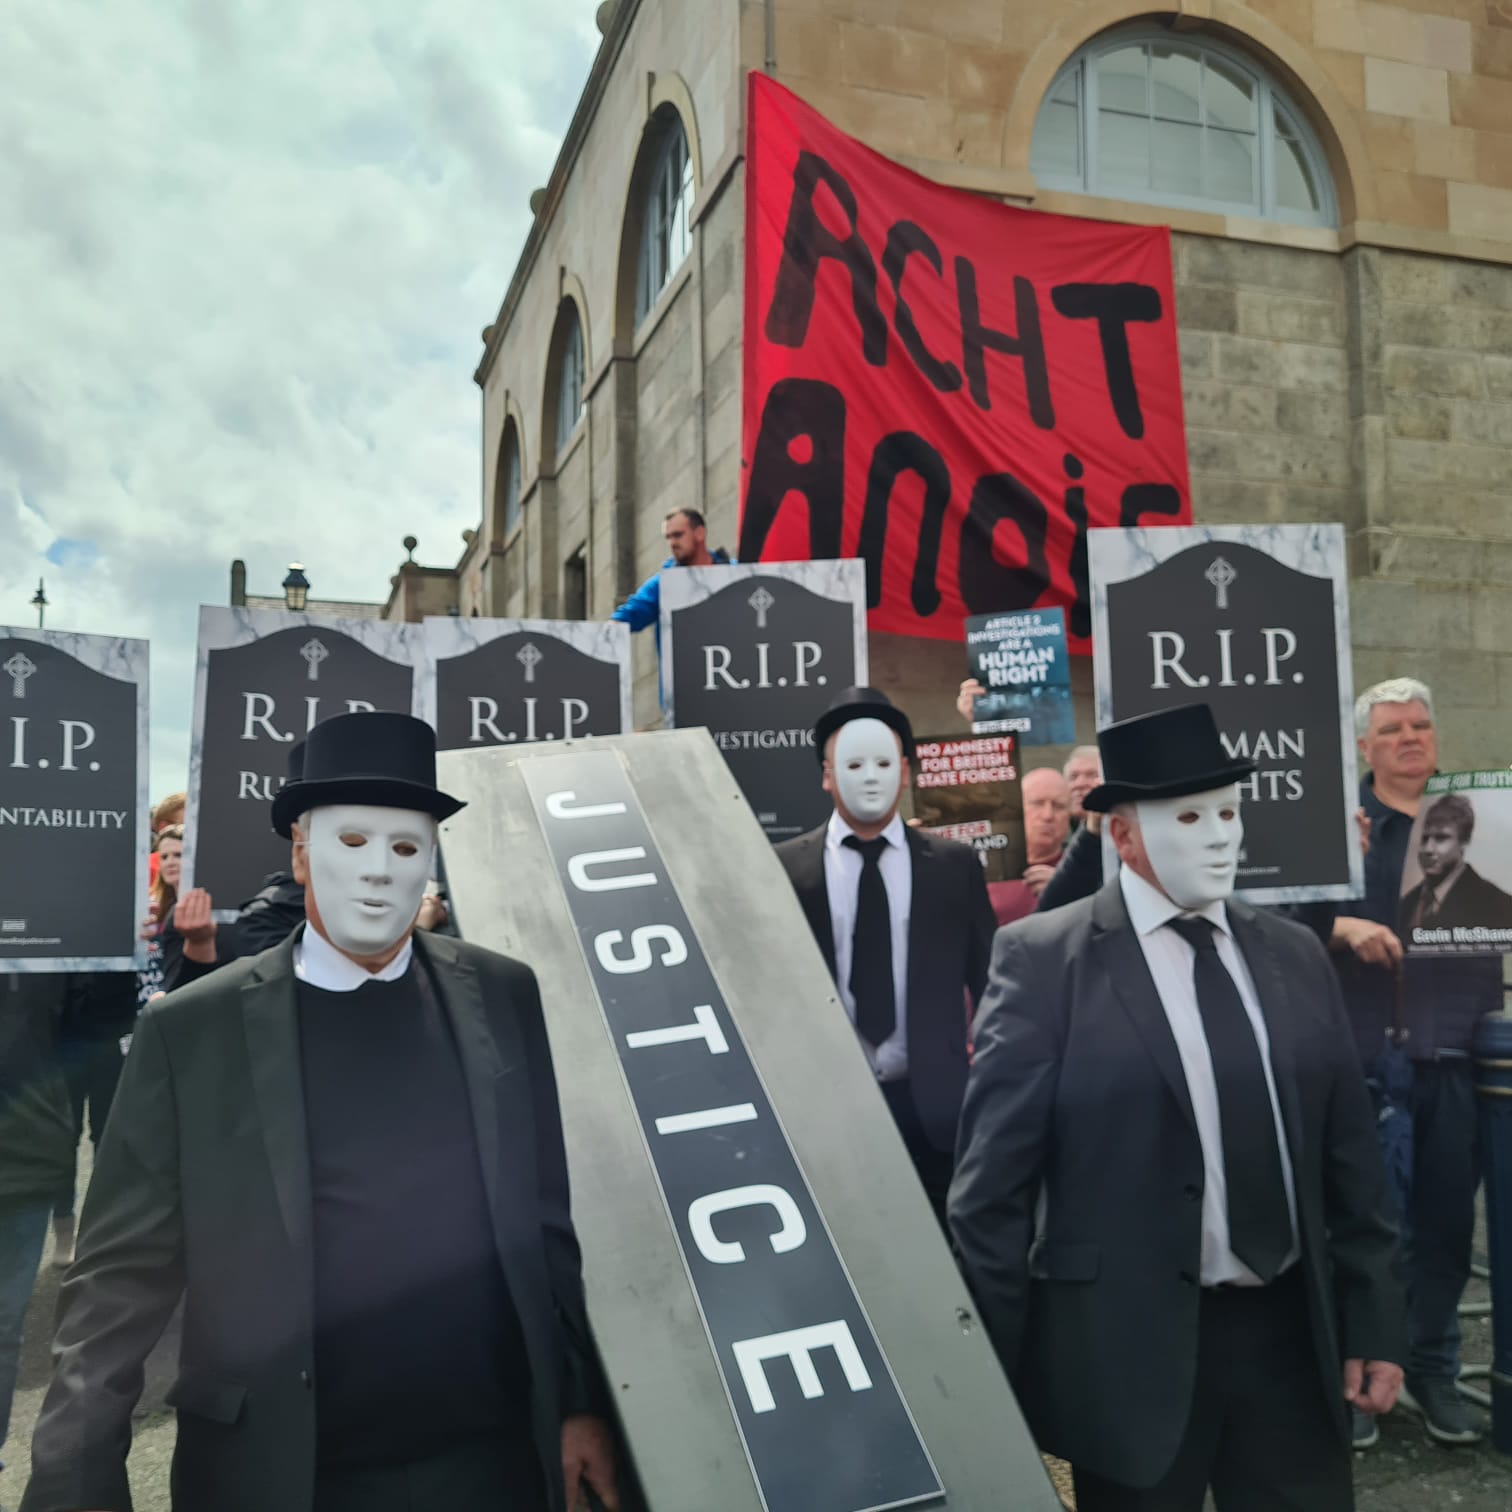 JUSTICE: Time for Truth campaigners greeted Prime Minister outside Hillsborough Castle on Monday